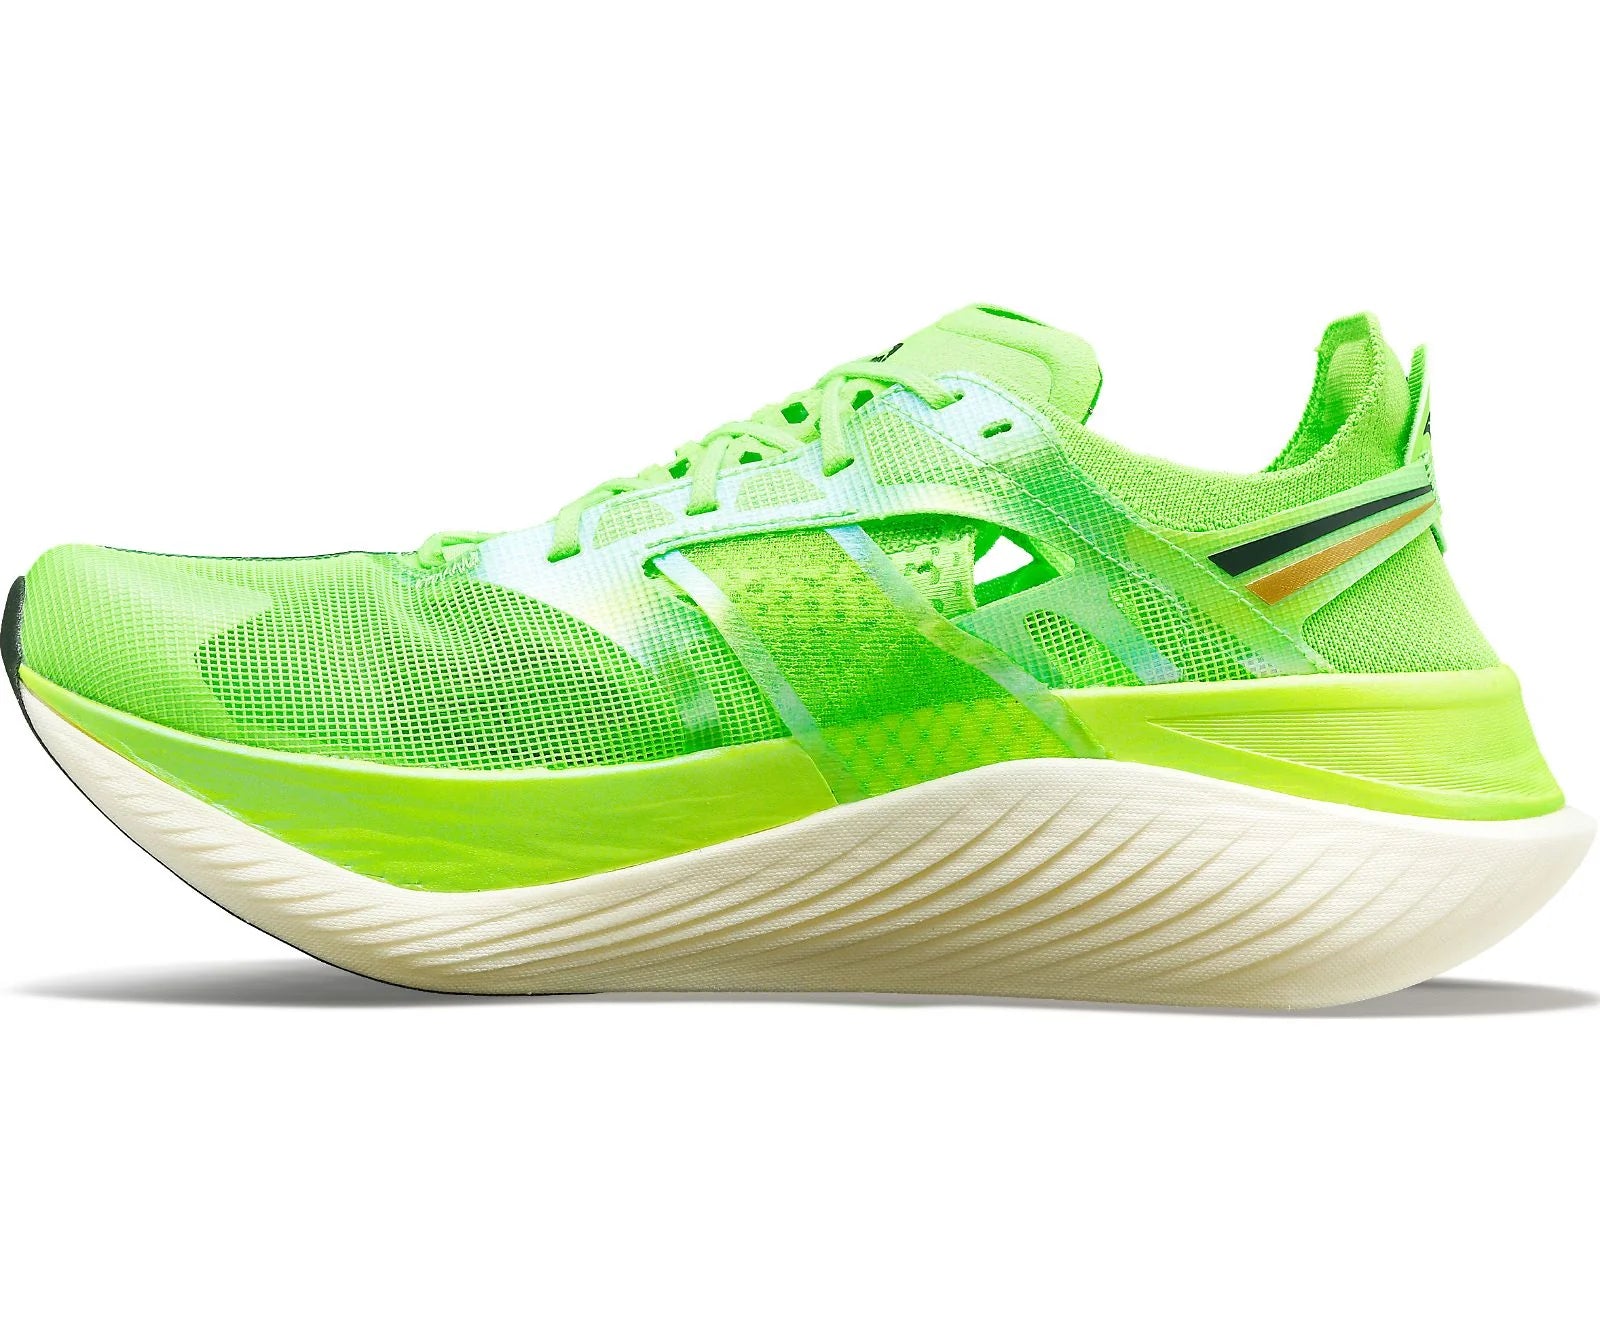 Medial view of the Women's Endorphin Elite by Saucony in the color Slime